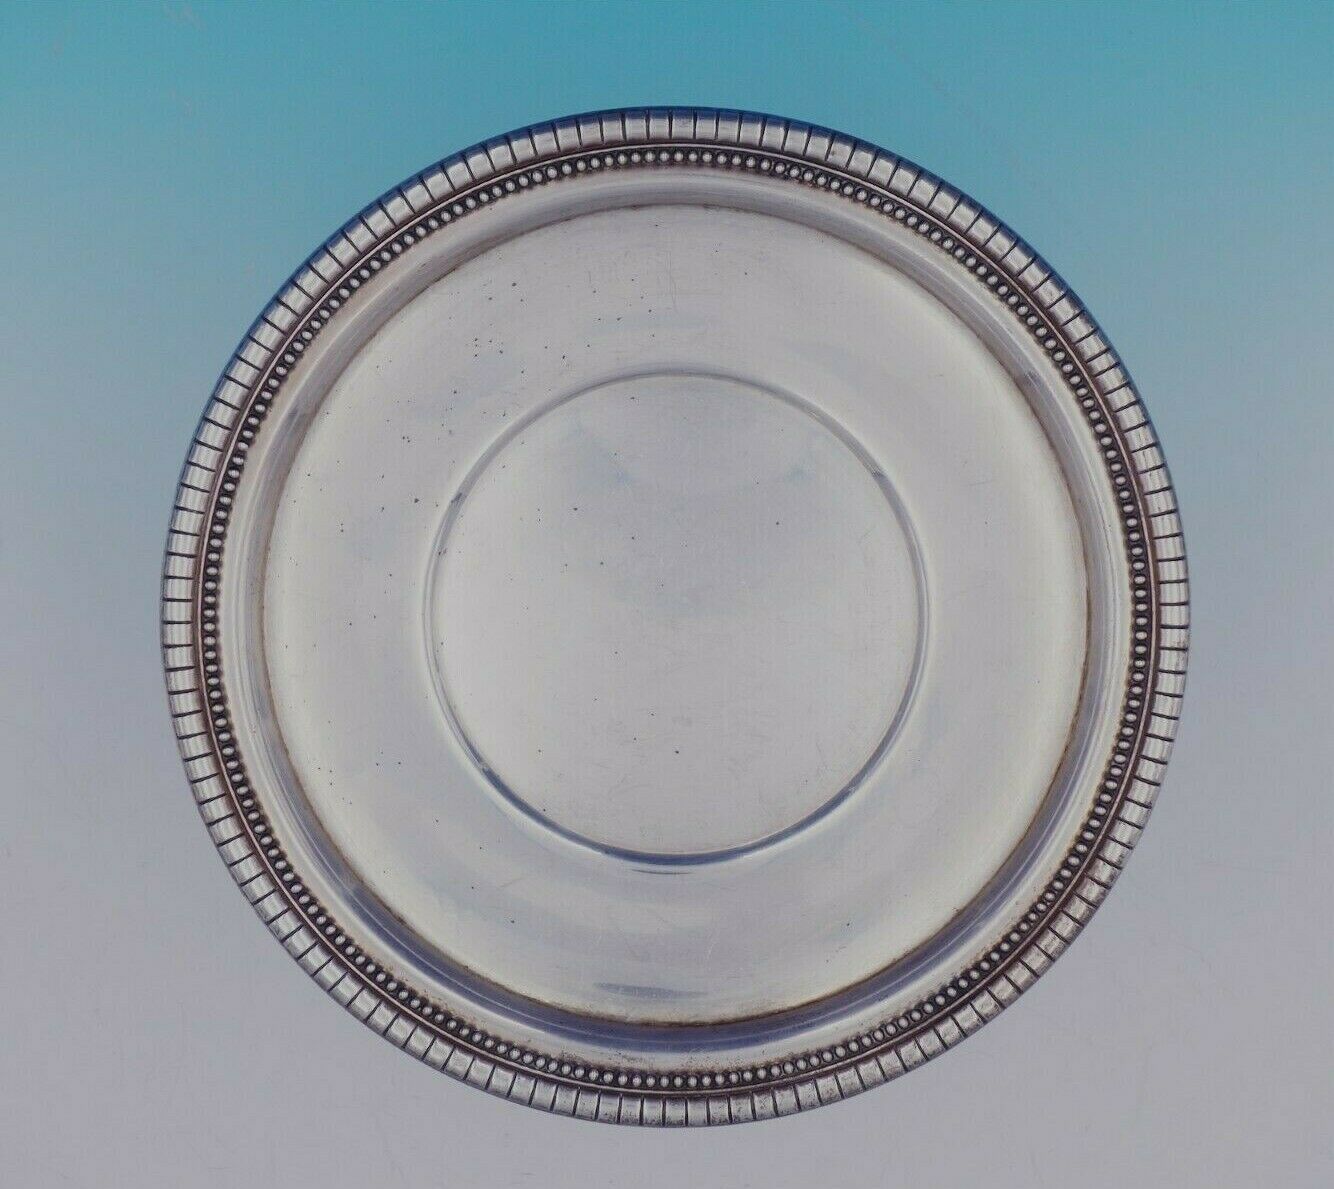 Primary image for Atalanta by Wallace Sterling Silver Serving Plate / Cookie Plate #4270 (#3389)